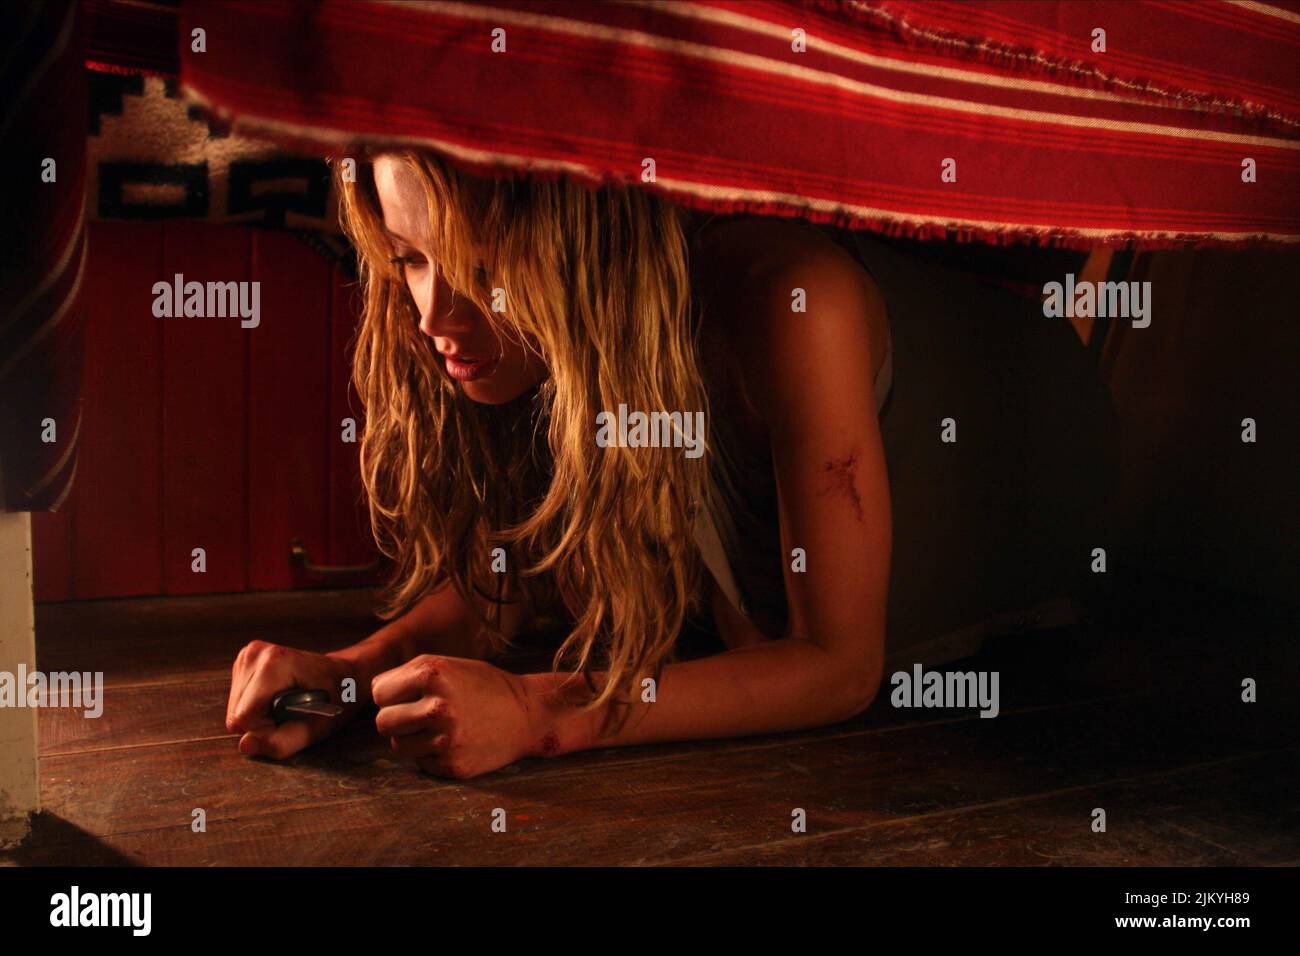 AMBER HEARD, AND SOON THE DARKNESS, 2010 Stock Photo